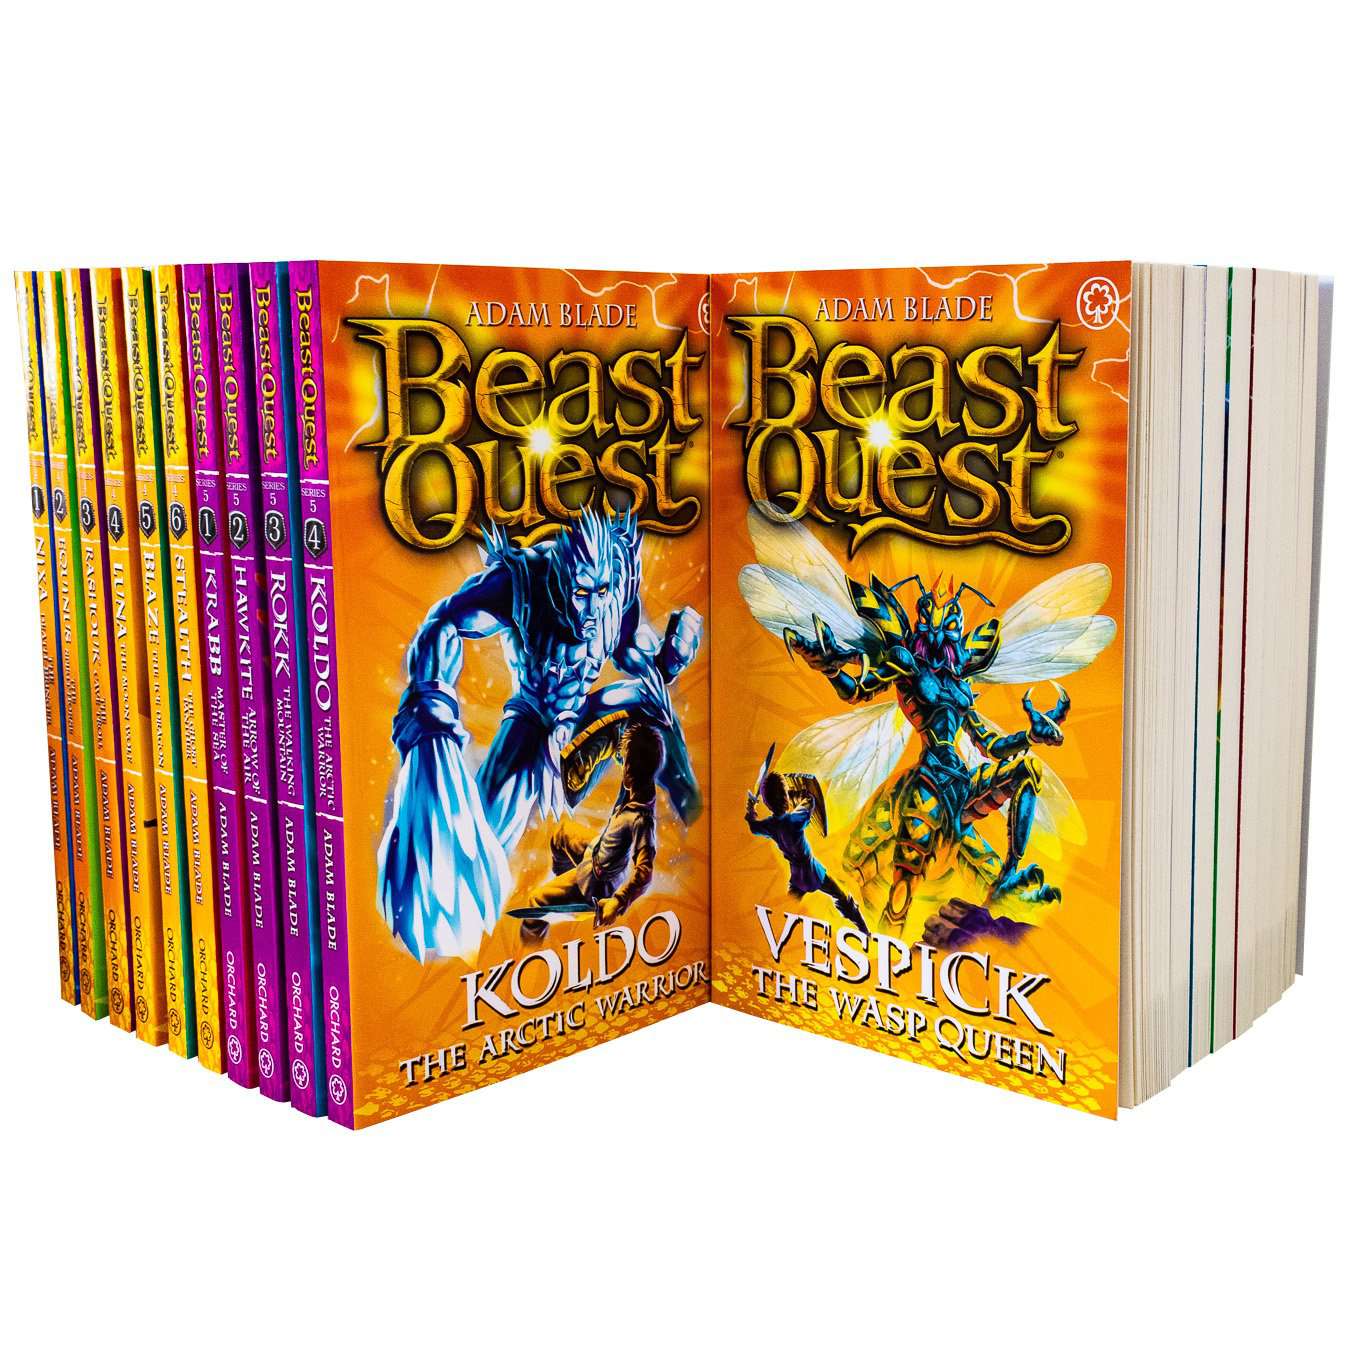 Beast Quest Series 4 to 6 - 18 Books Young Adult Collection Paperback By Adam Blade - St Stephens Books